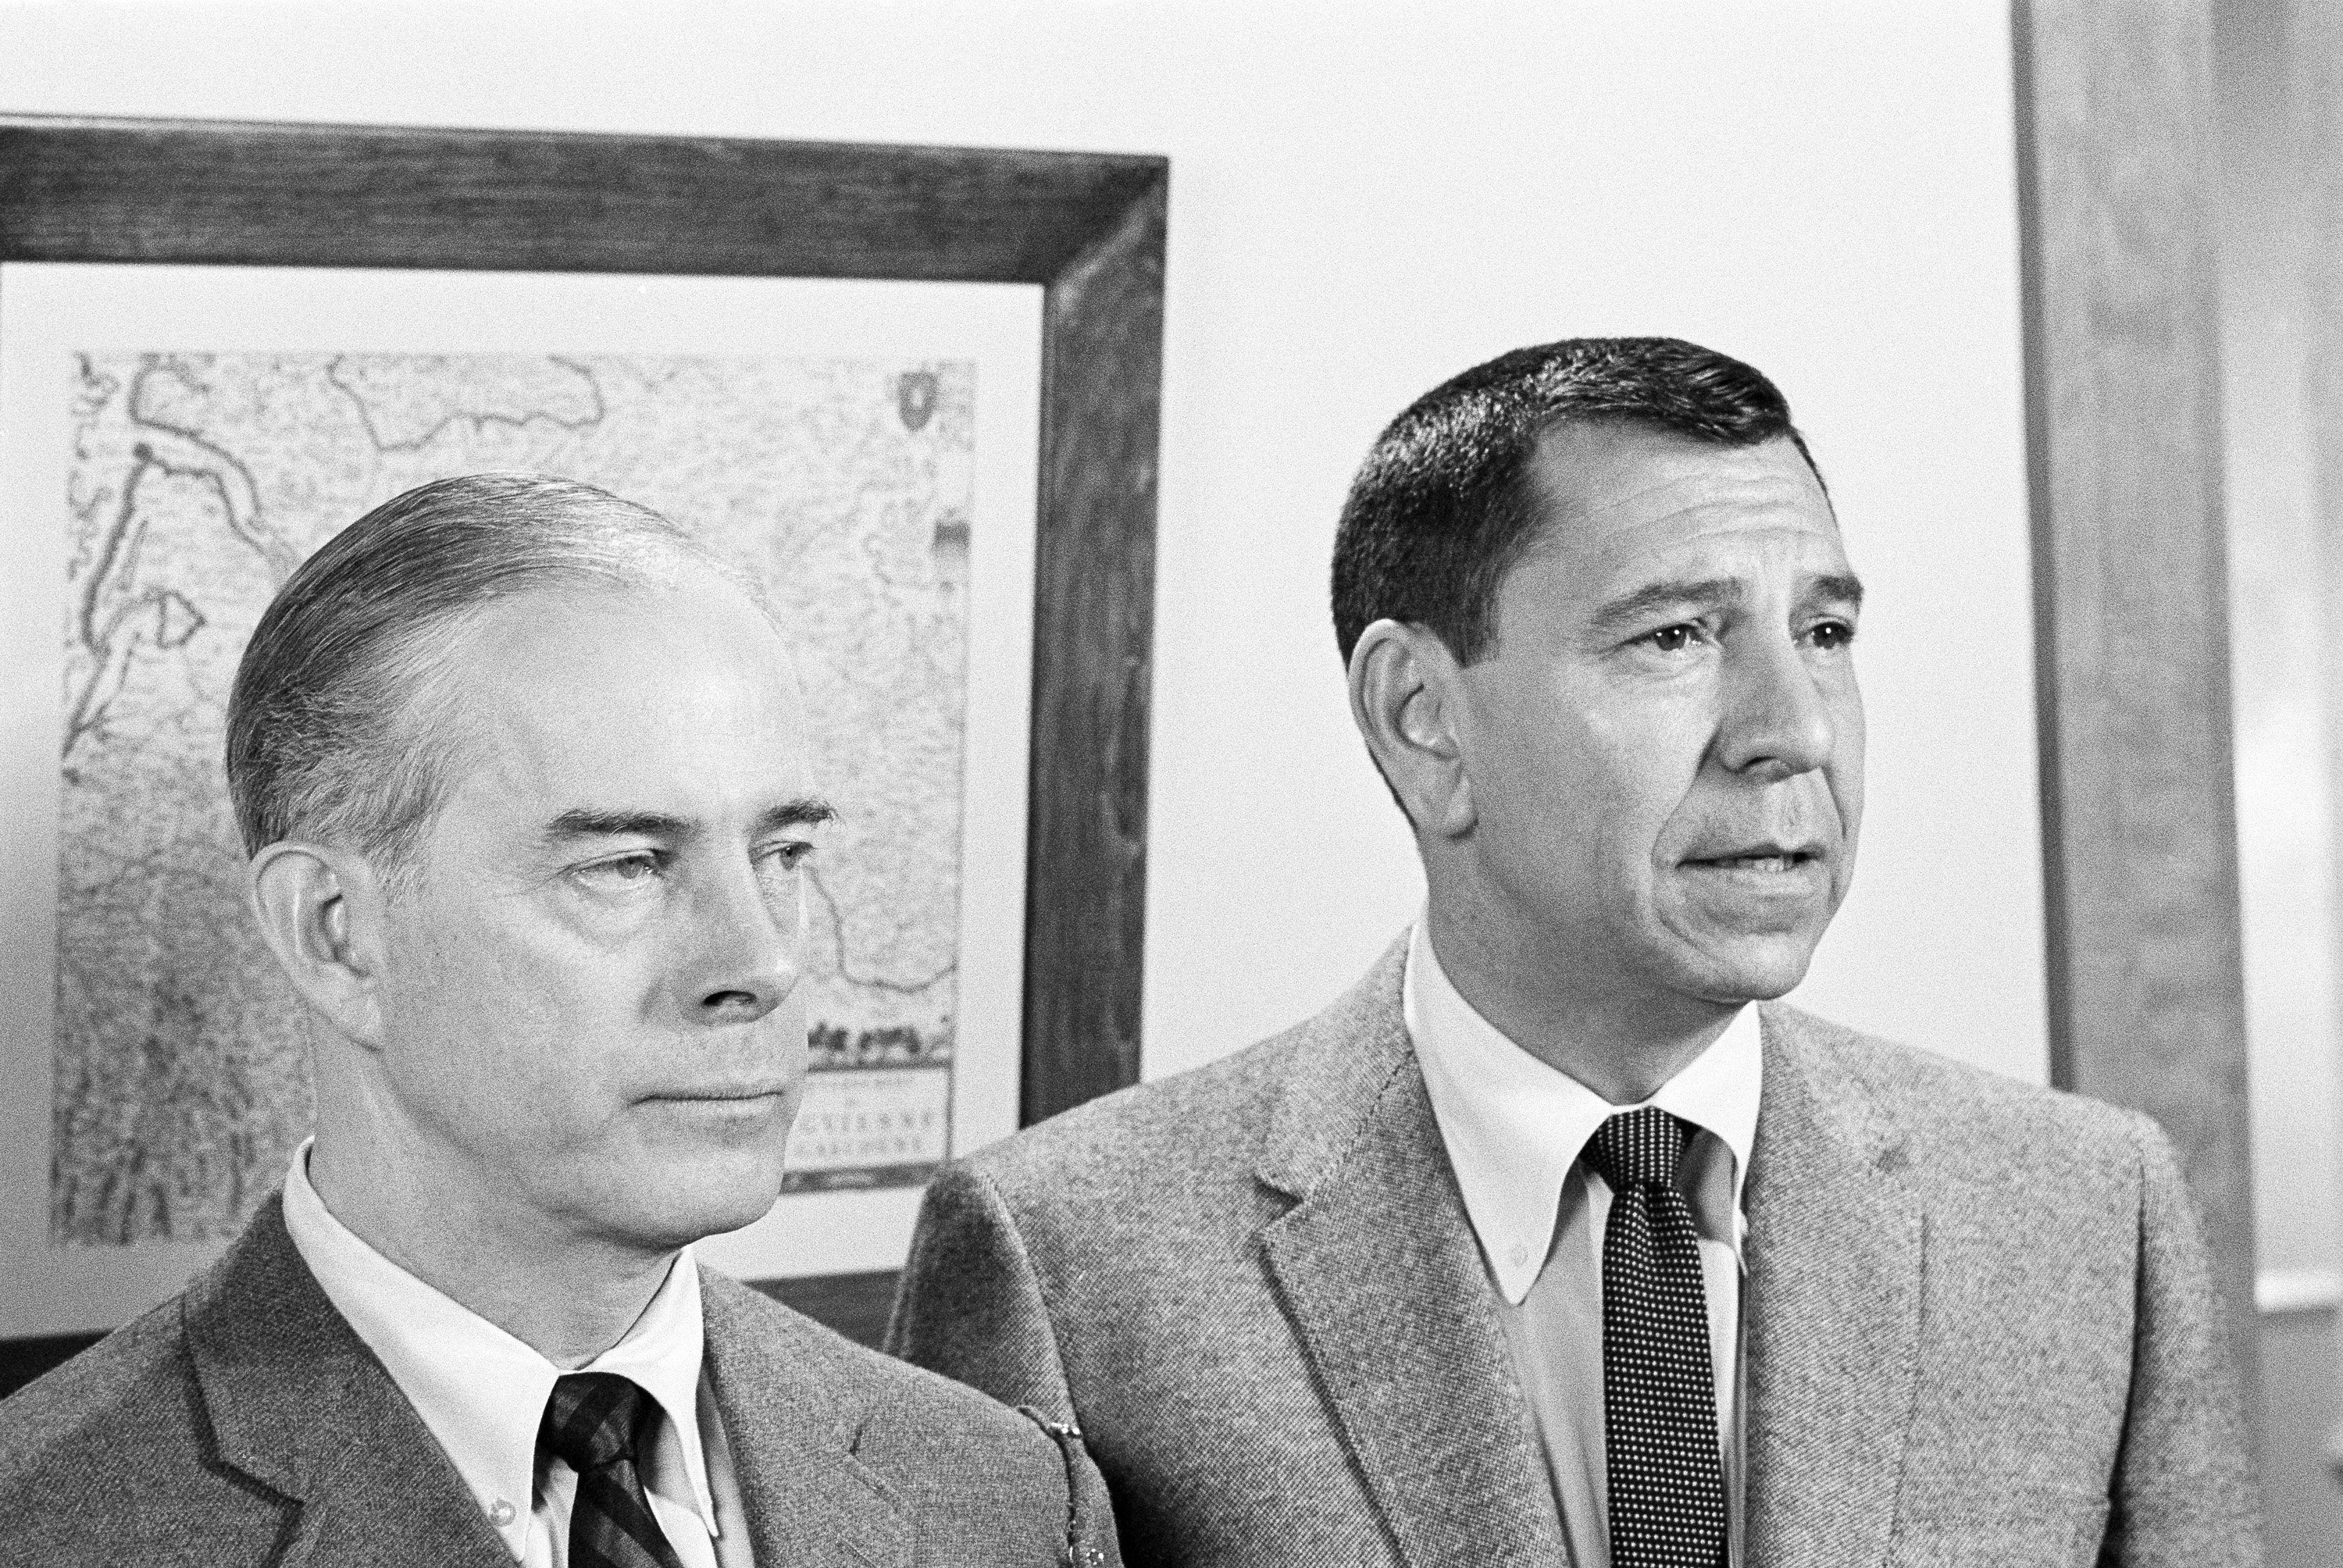 'Dragnet' actors Harry Morgan and Jack Webb dressed in suits in a black and white photo from the series.